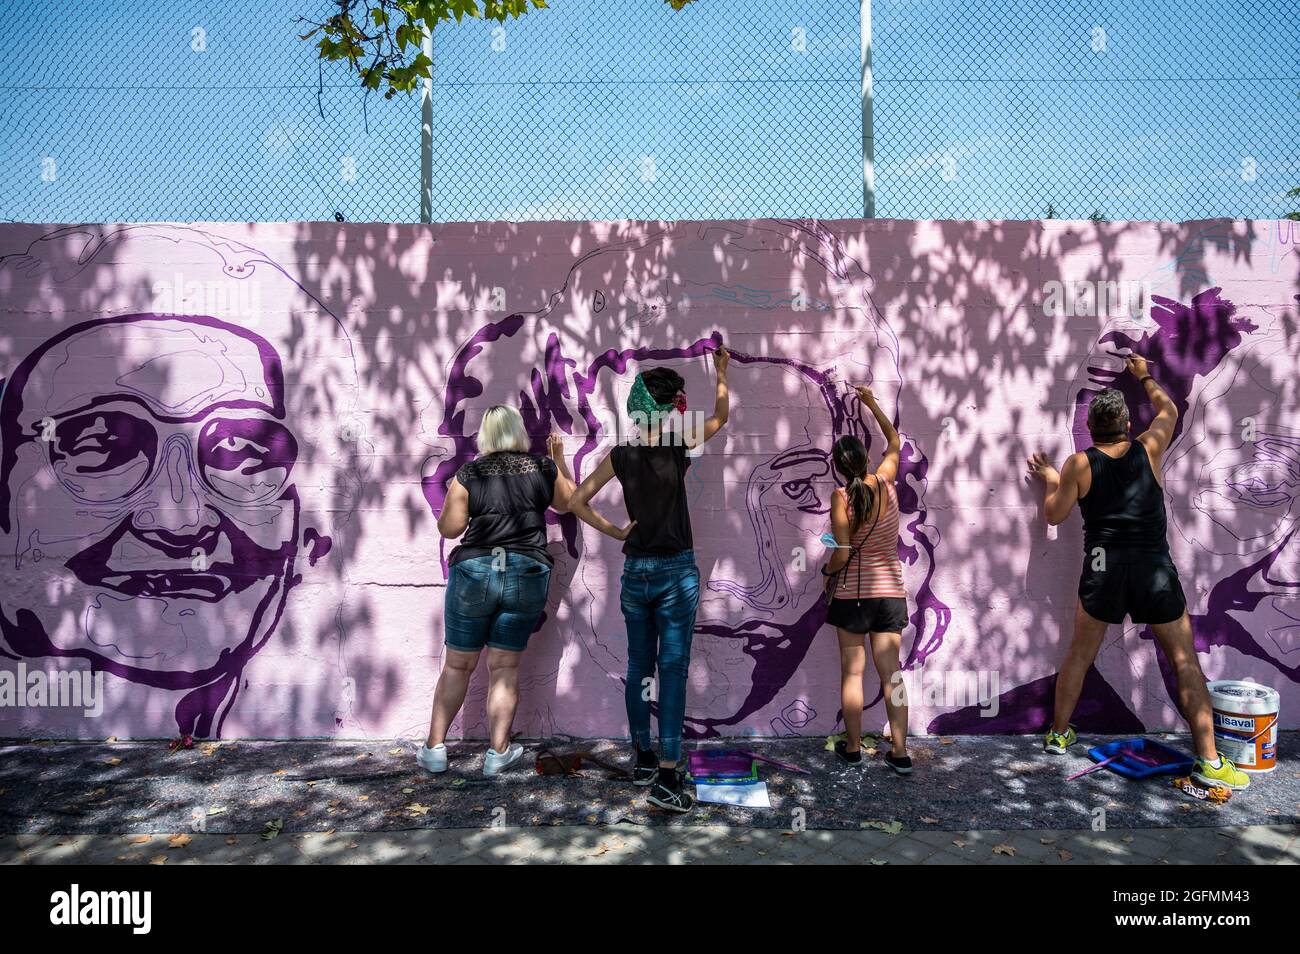 Madrid, Spain, 26/08/2021, Madrid, Spain. 26th Aug, 2021. Members of UNLOGIC artistic group repainting a feminist mural that appeared vandalized during the past International Women's Day. The mural represents famous women from around the world, with the faces of 15 women who are part of history for their fight in favor of equality: Angela Davis, Frida Kahlo, Nina Simone, Rigoberta Menchu, Lucia Sanchez Saornil, Rosa Arauzo, Valentina Tereshkova, Chimamanda Ngozi, Emma Goldman, Kanno Sugato, Liudmila Pavlichenko, Billy Jean King, Gata Cattana, Rosa Parks, and Comandanta Ramona. Credit: Marcos d Stock Photo